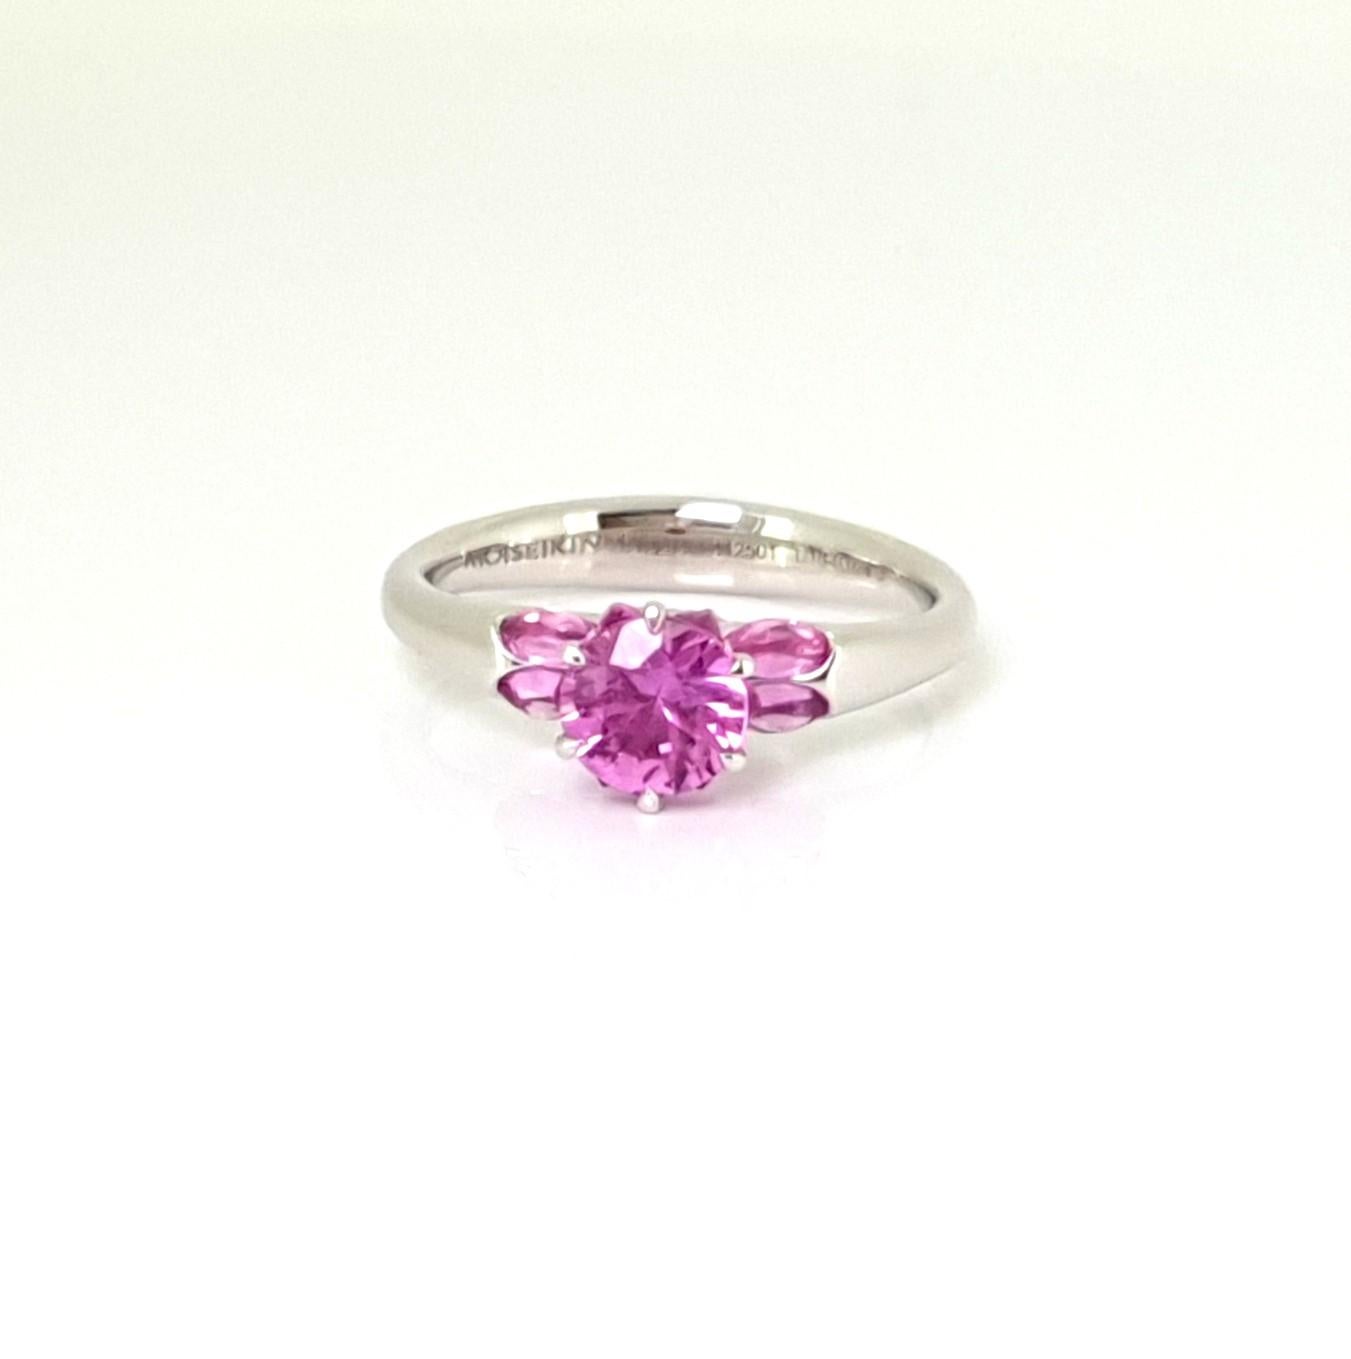 Made from 18K white gold, the Lotus Ring from Moiseikin's Harmony of Water collection exudes elegance and grace.
At its heart lies a captivating 1.01 ct pink sapphire, cradled by six petal-like fancy sapphires in a reverse setting. This unique